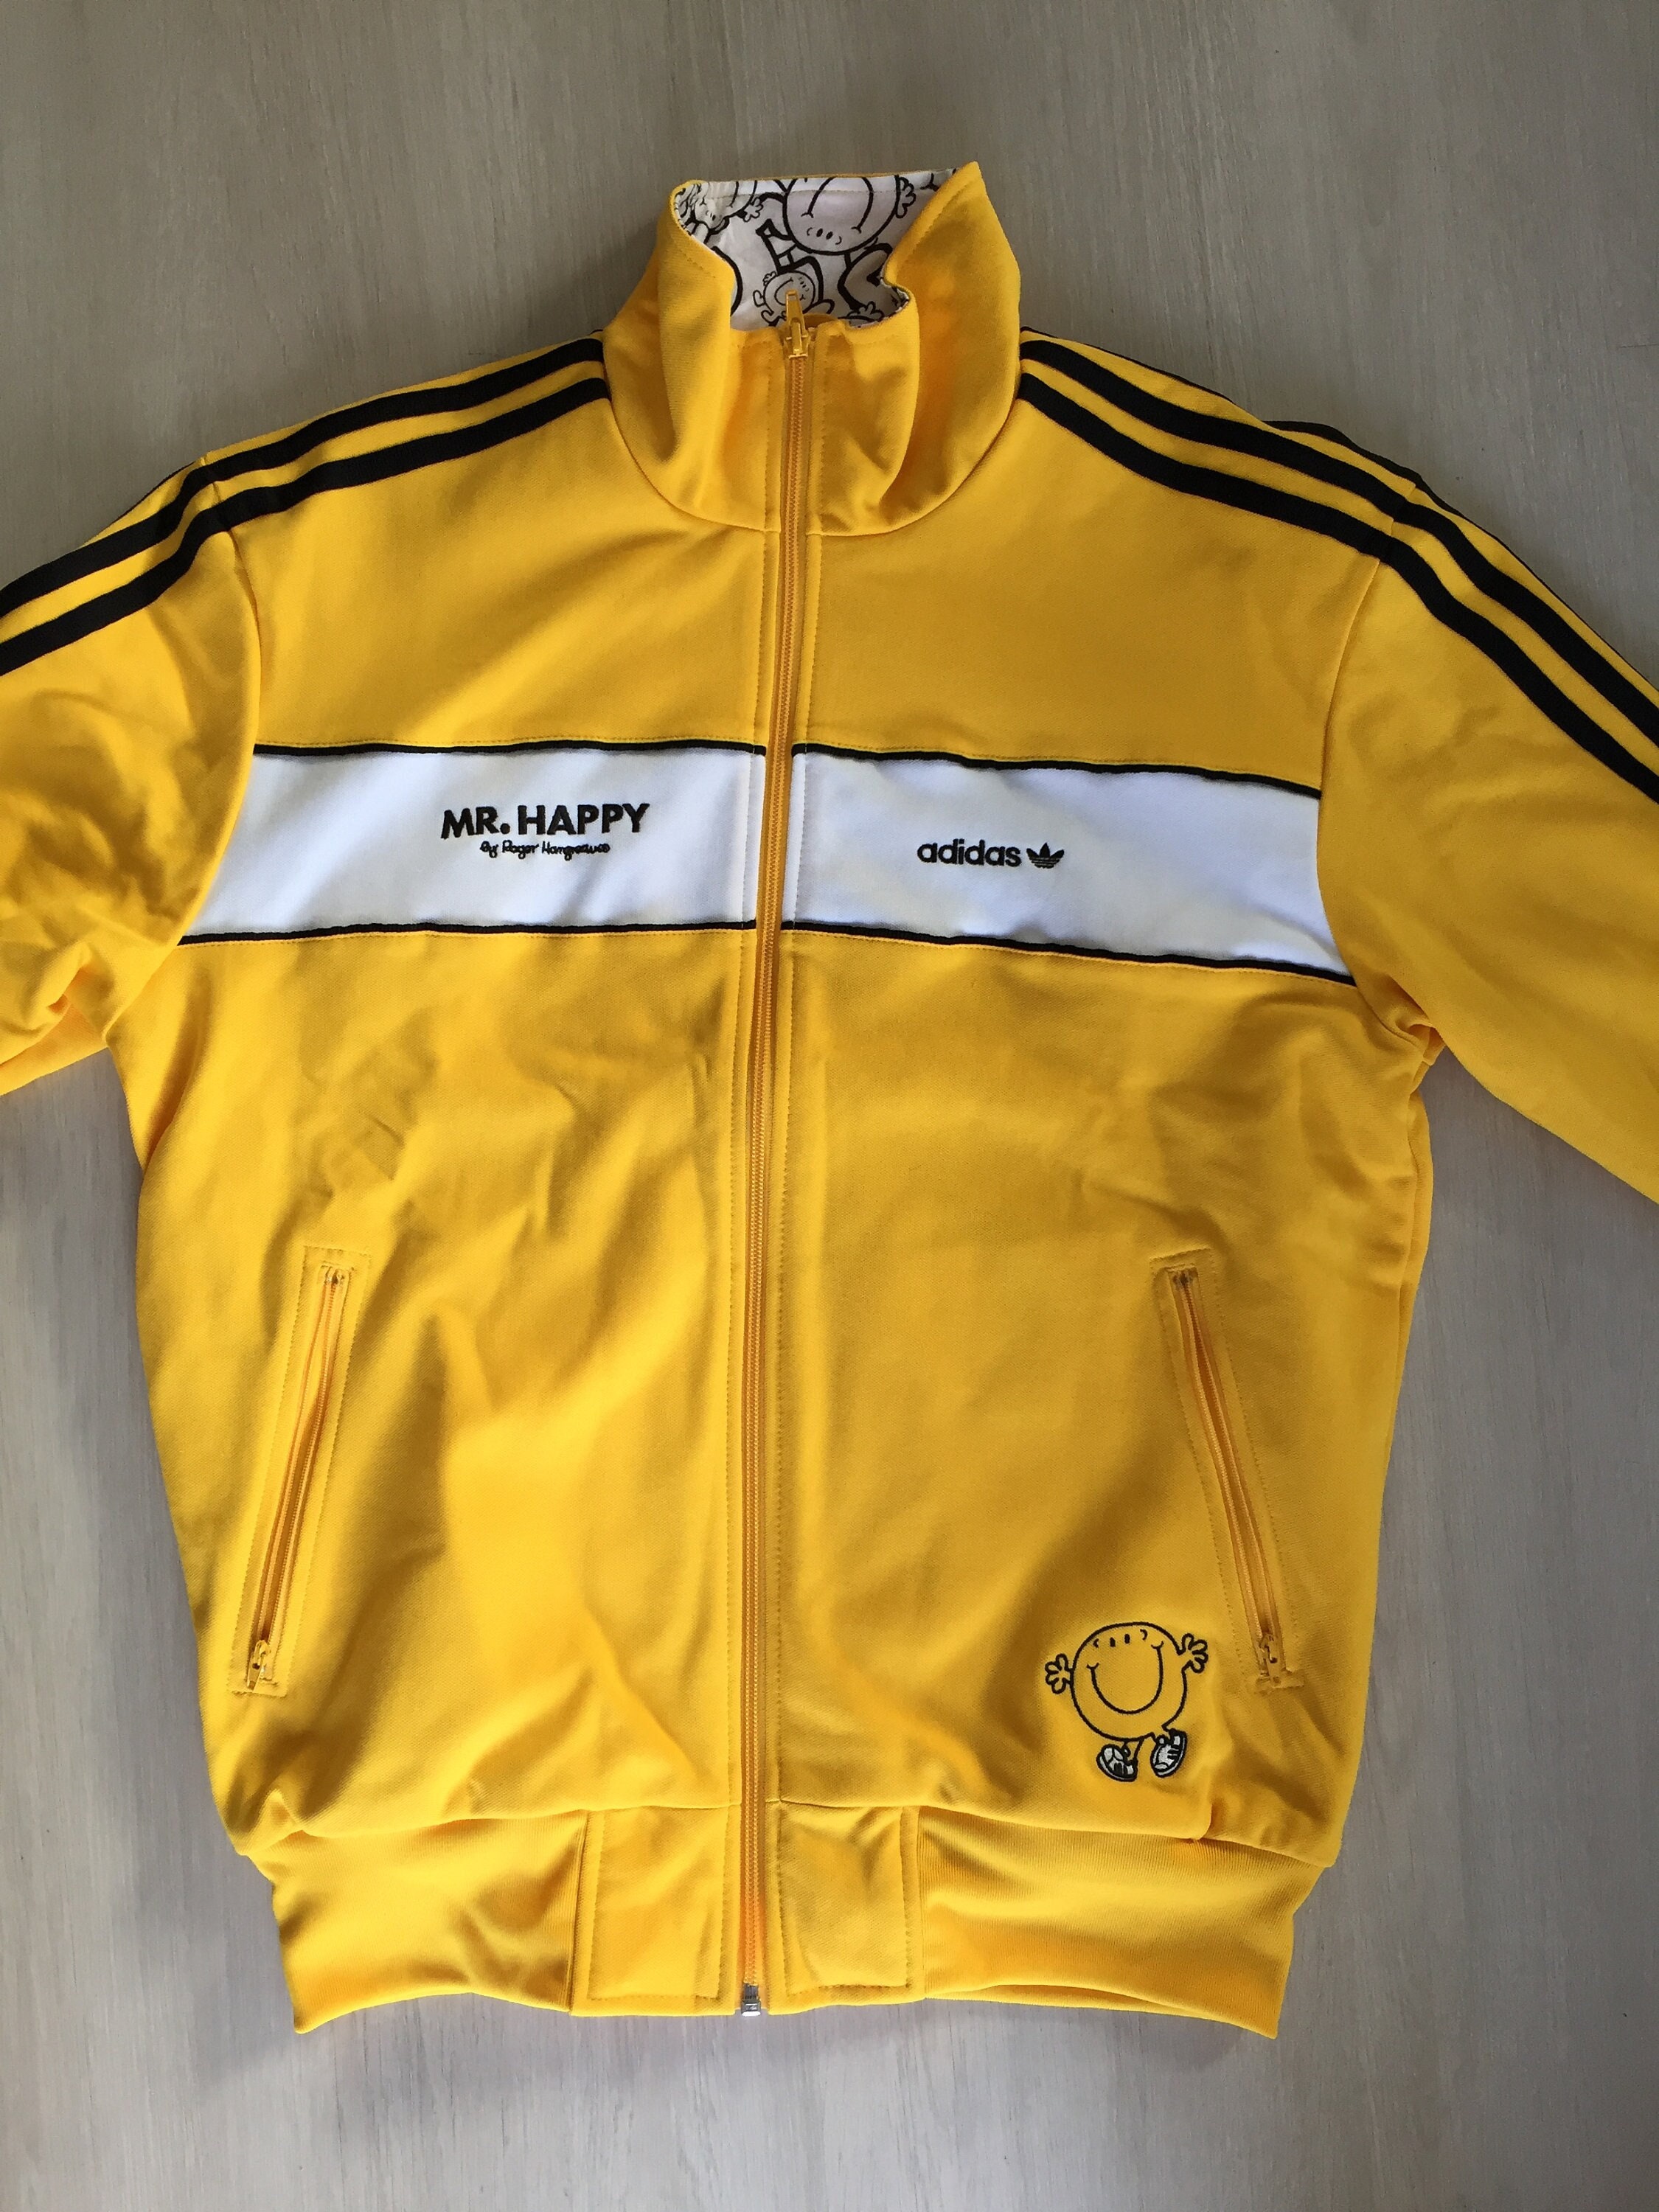 Adidas Limited Edition Mr Happy Jacket Collection - Etsy Zealand